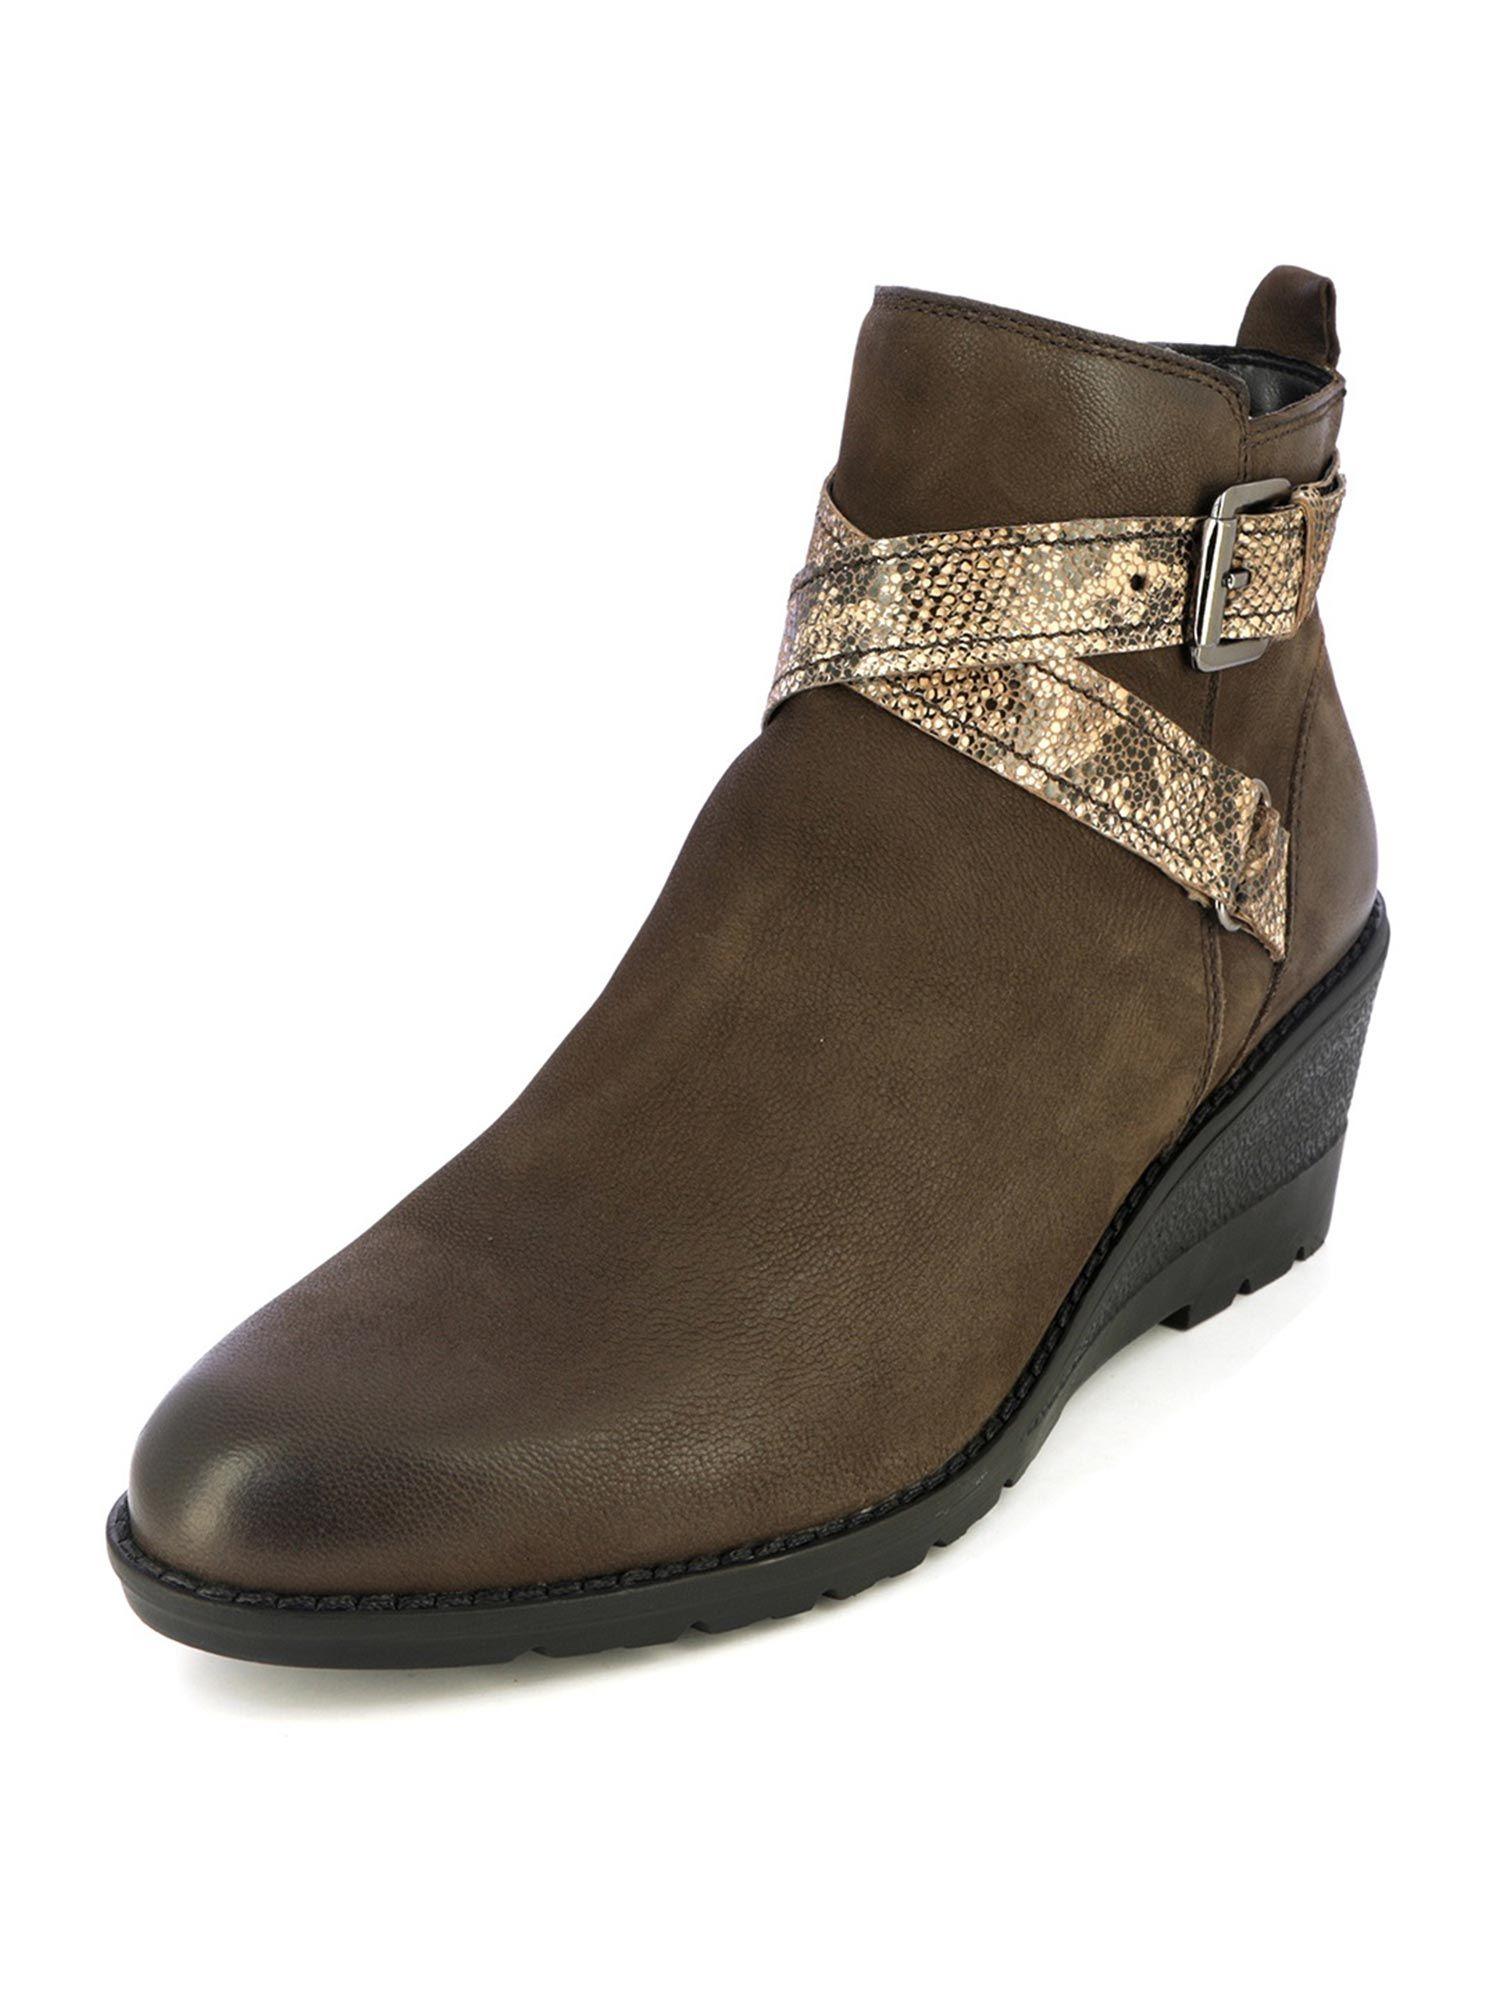 brown-snake-print-wedge-ankle-boots